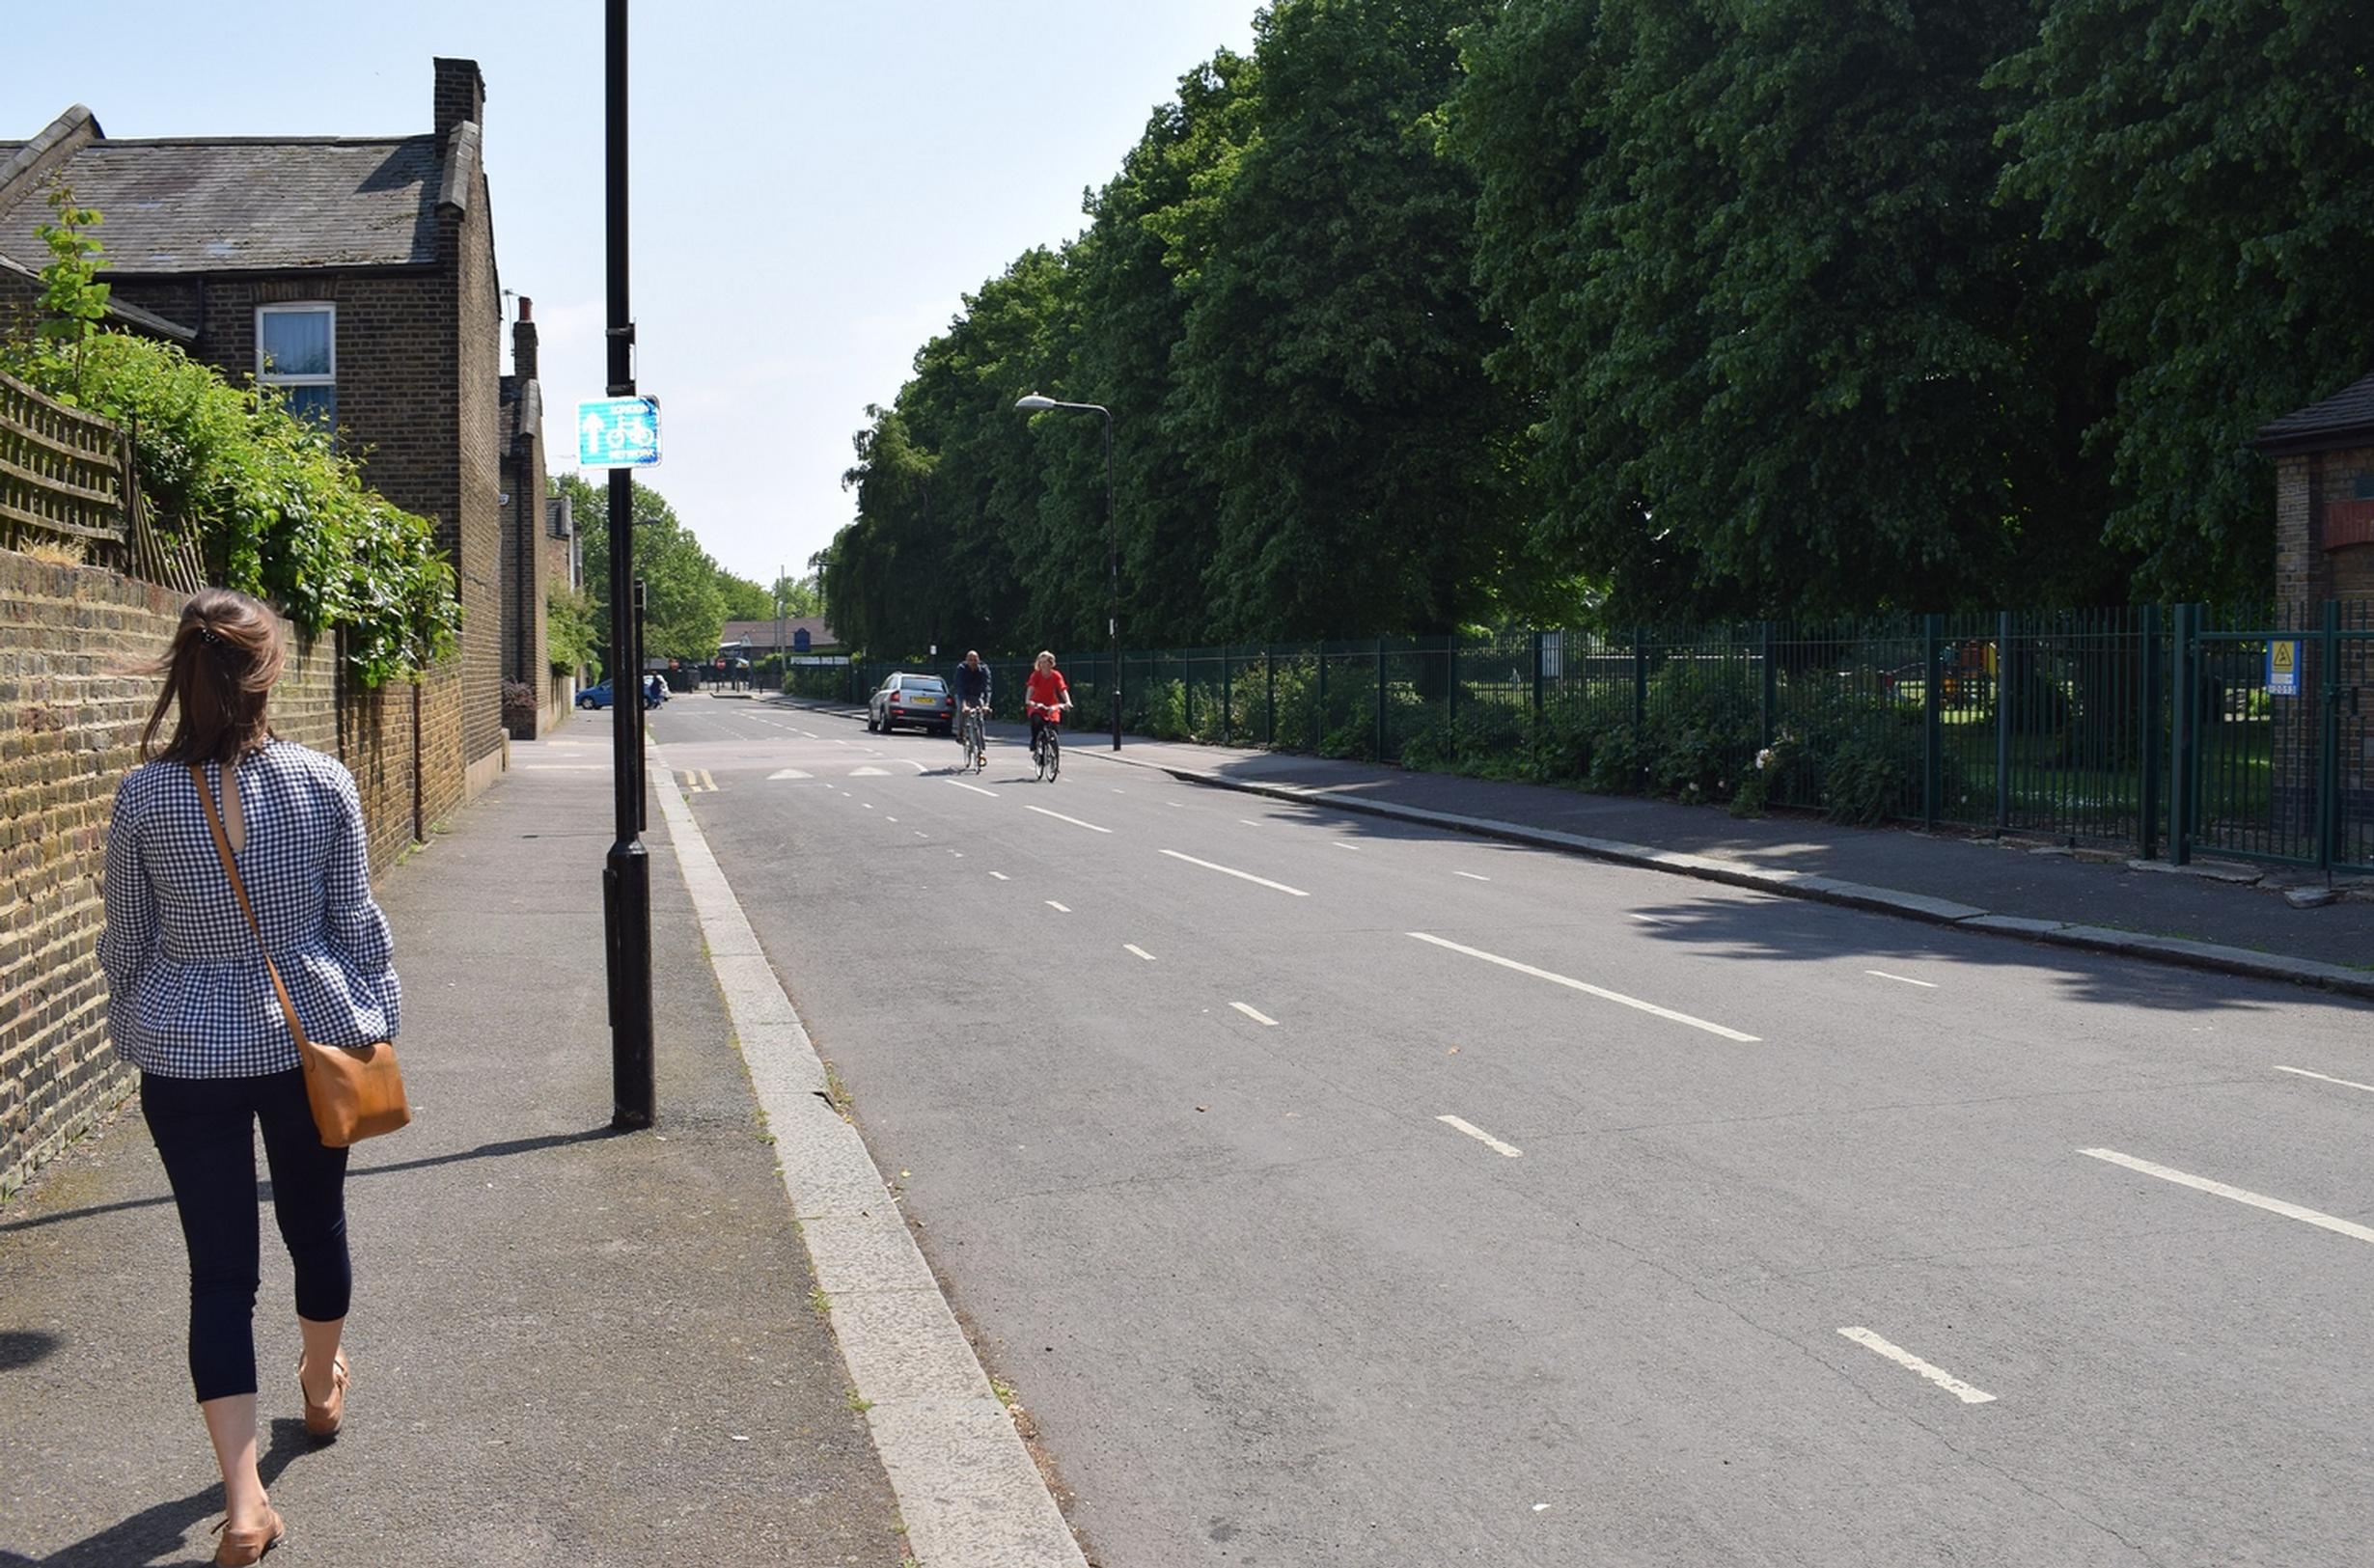 Waltham Forest Council is a long-standing advocate of cycling